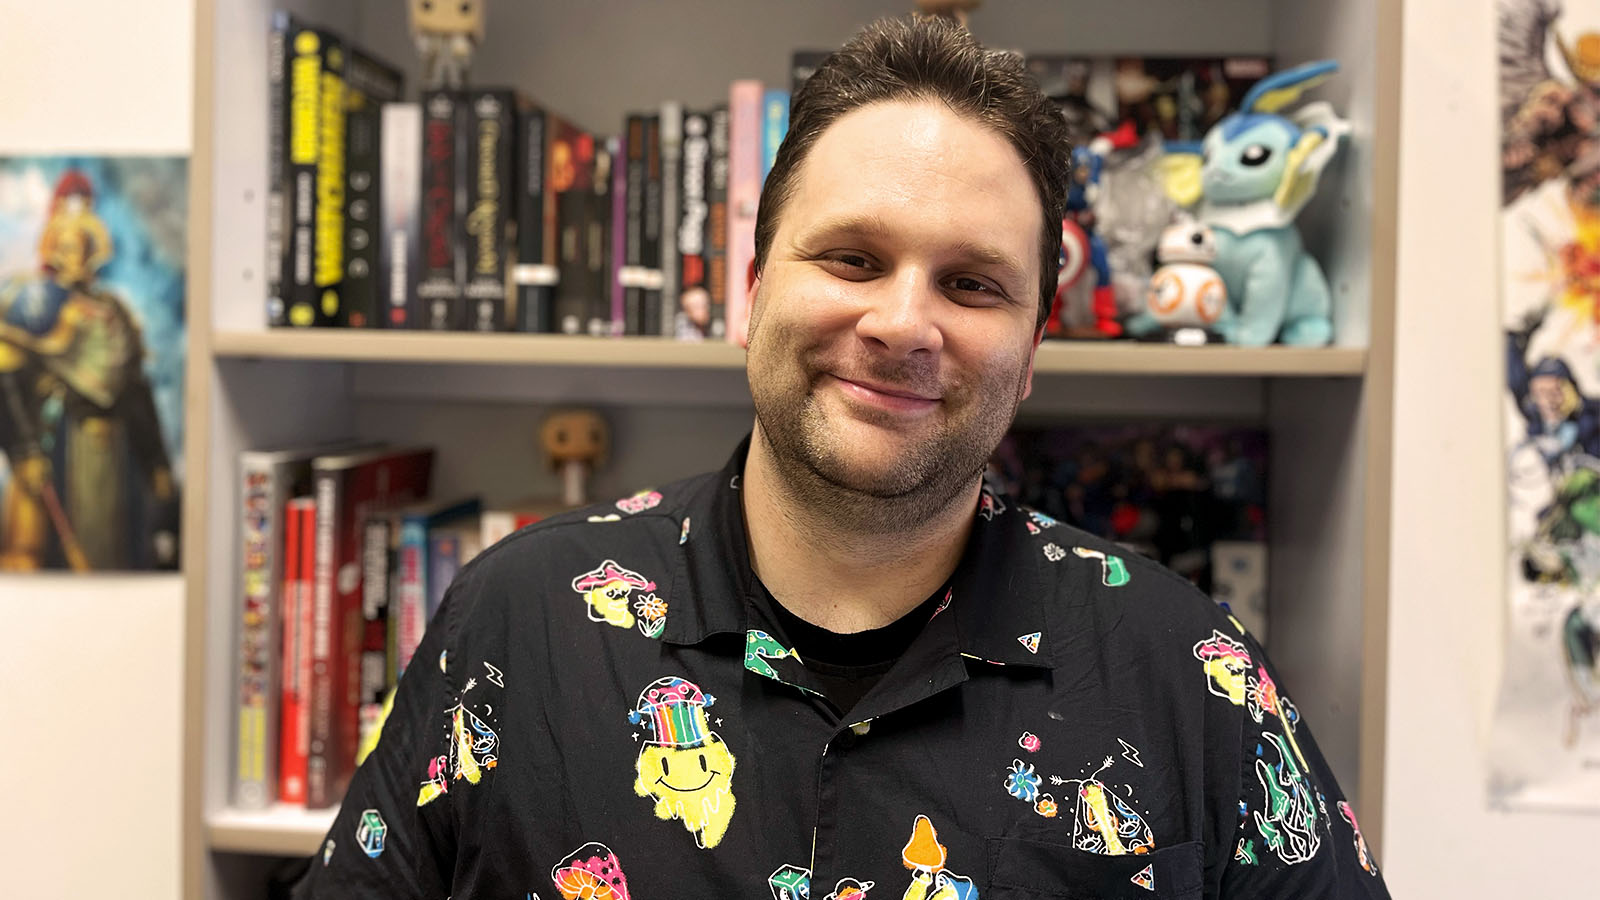 A man is wearing a black shirt with colourful cartoon drawings on it. He is tanding in front fo a bookshelf stacked with books and figurines.